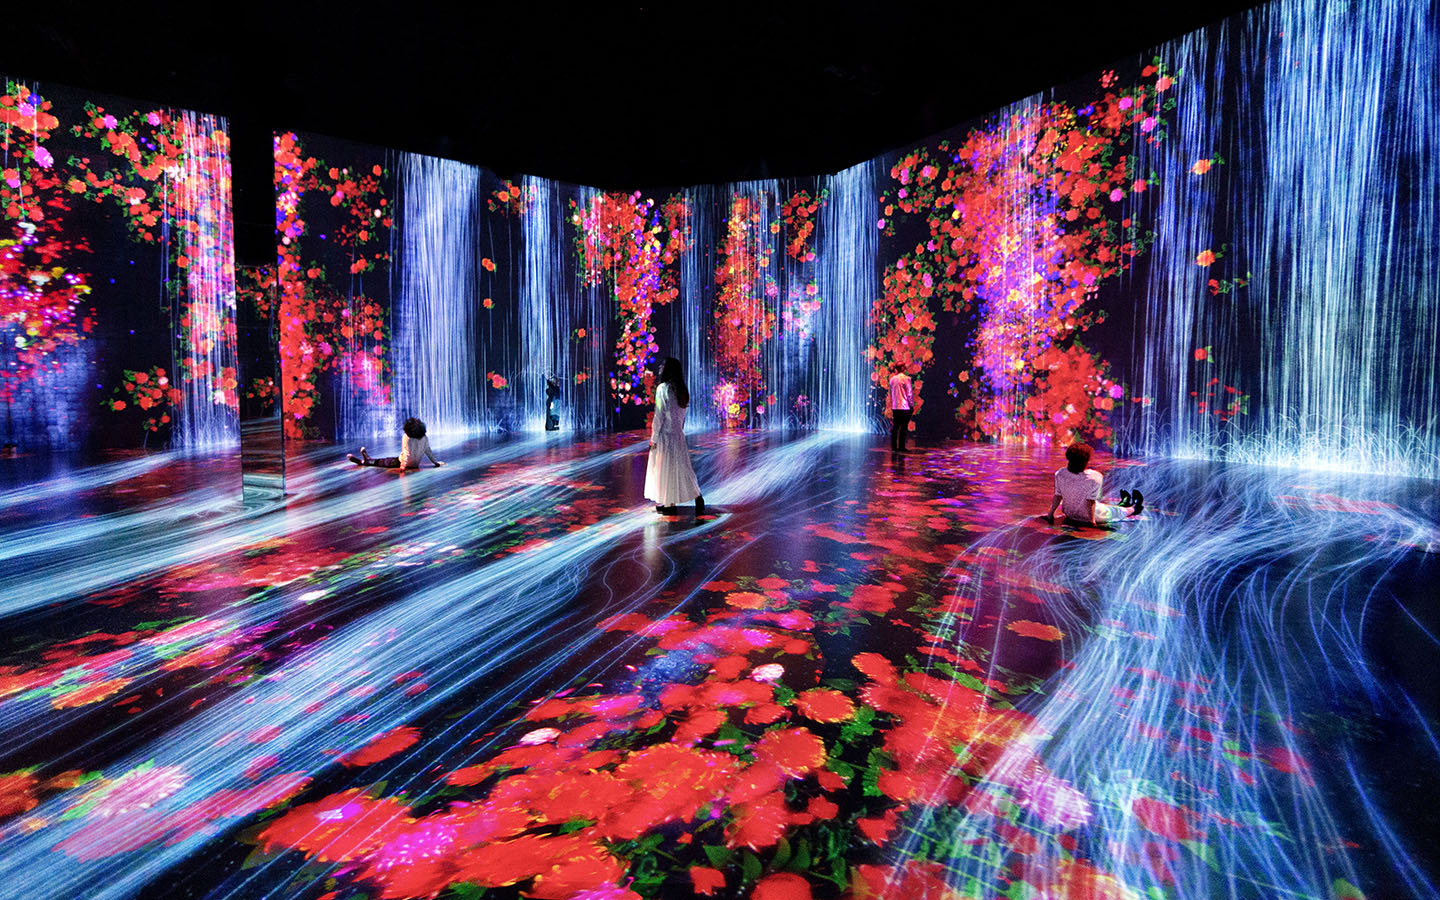 teamLab's "Flowers and People, Cannot Be Controlled"